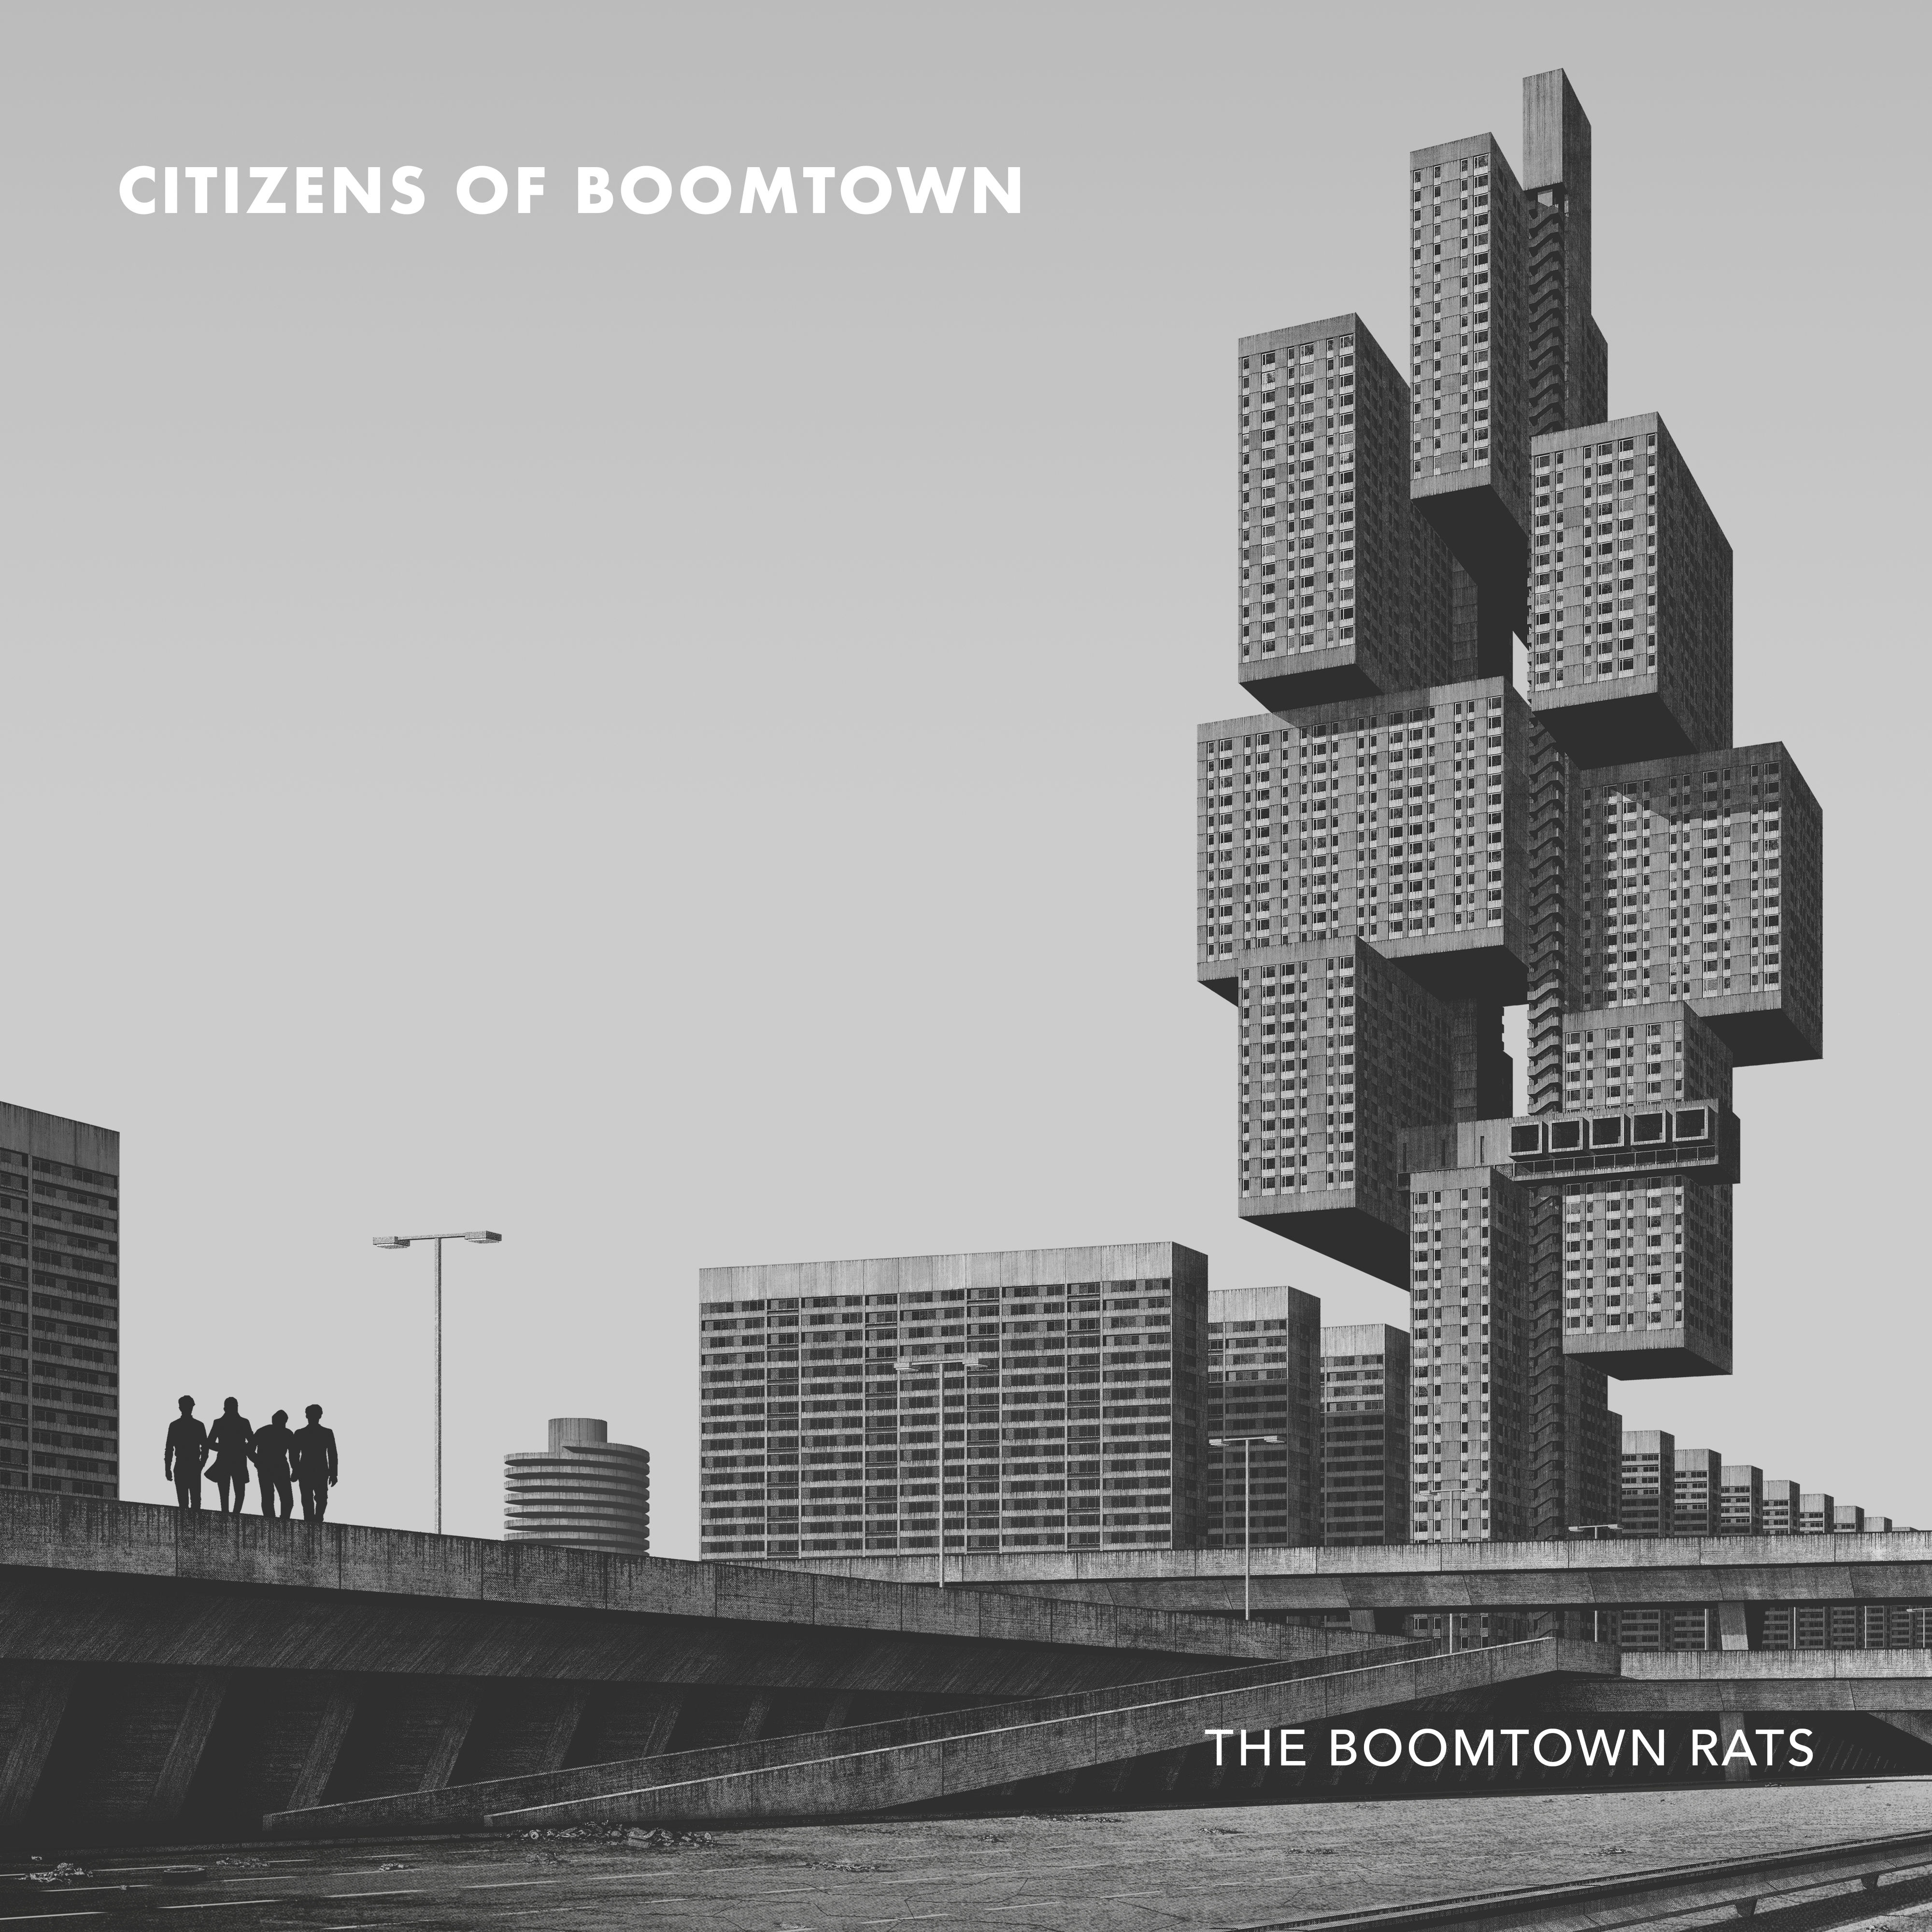 The Boomtown Rats - Citizens of Boomtown (2020) [FLAC 24bit/96kHz]